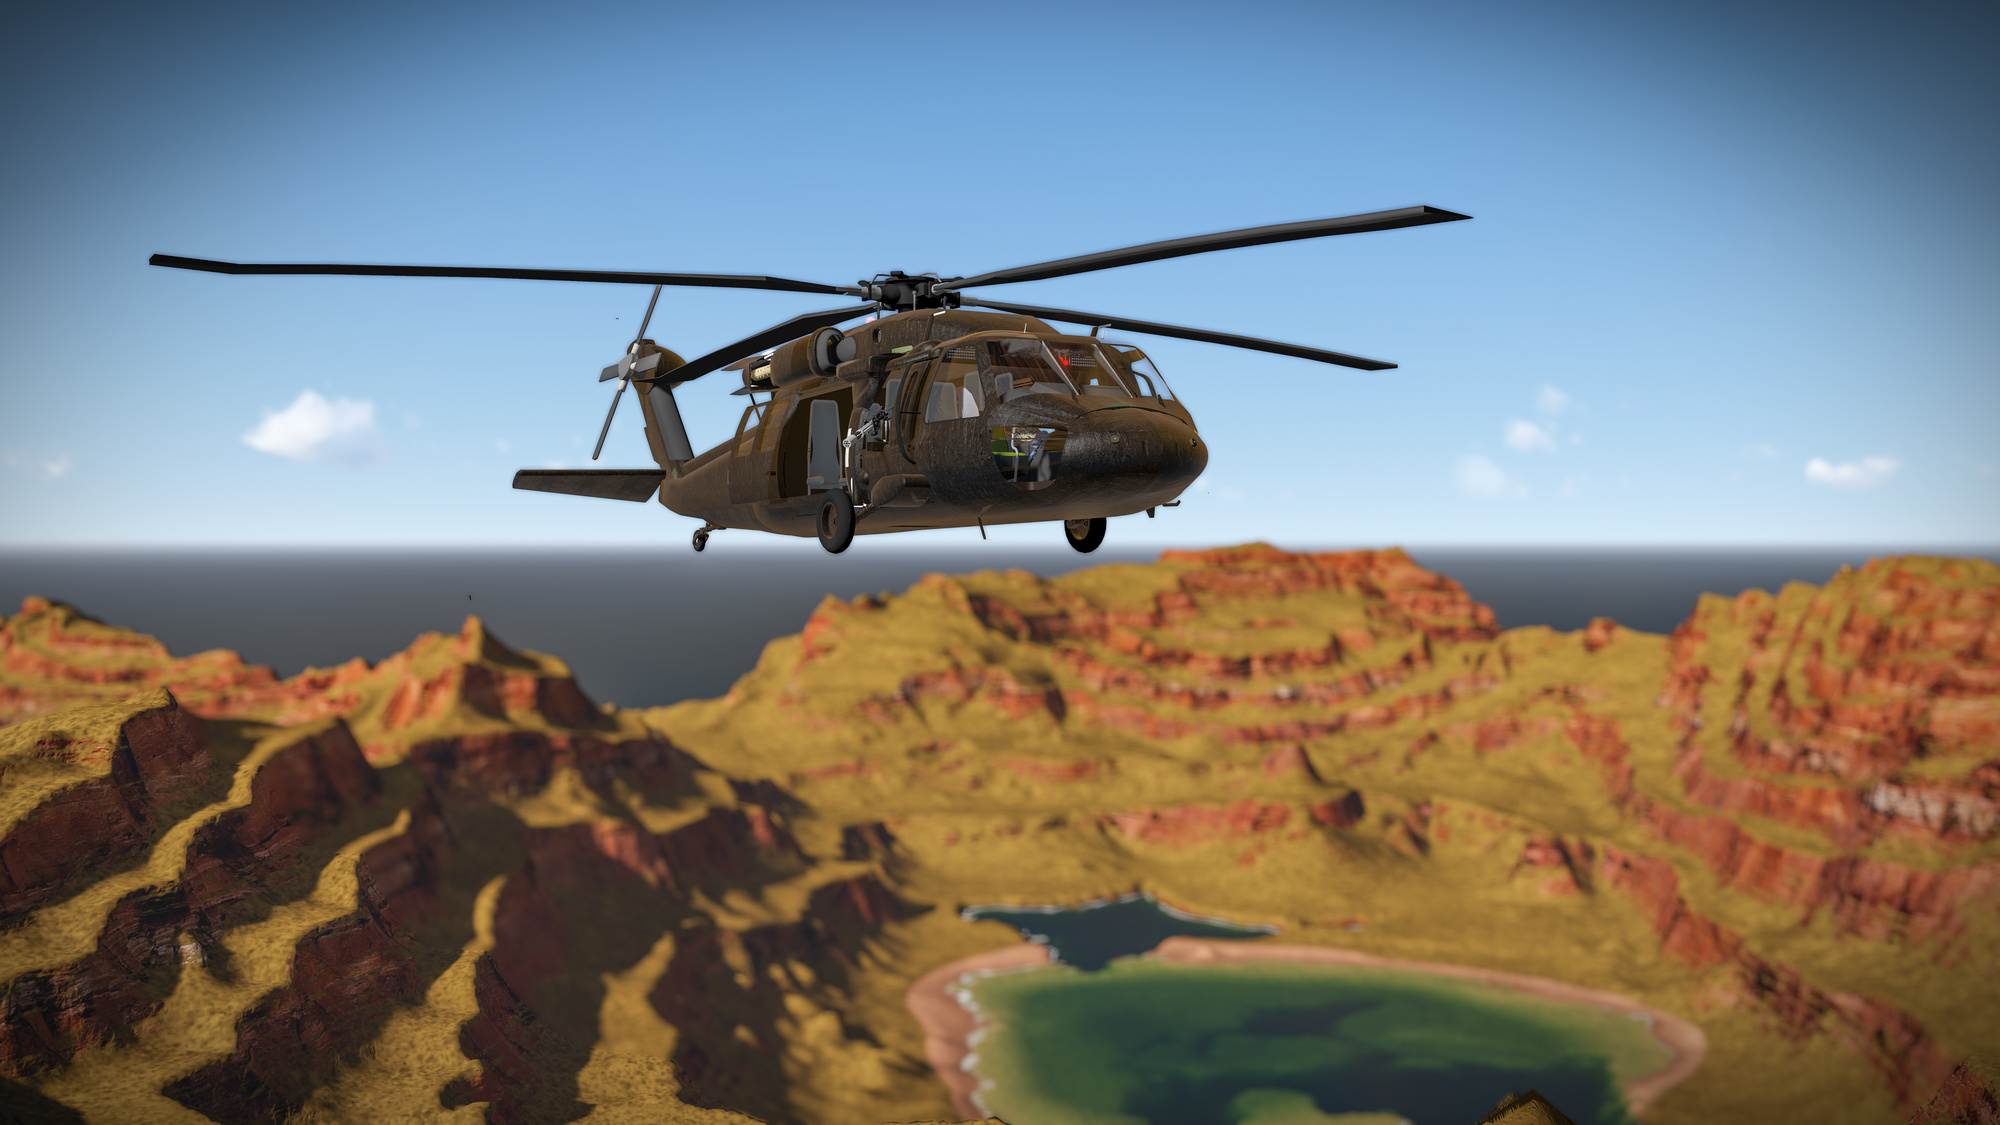 Your Guide to the UH-60 Black Hawk Helicopter